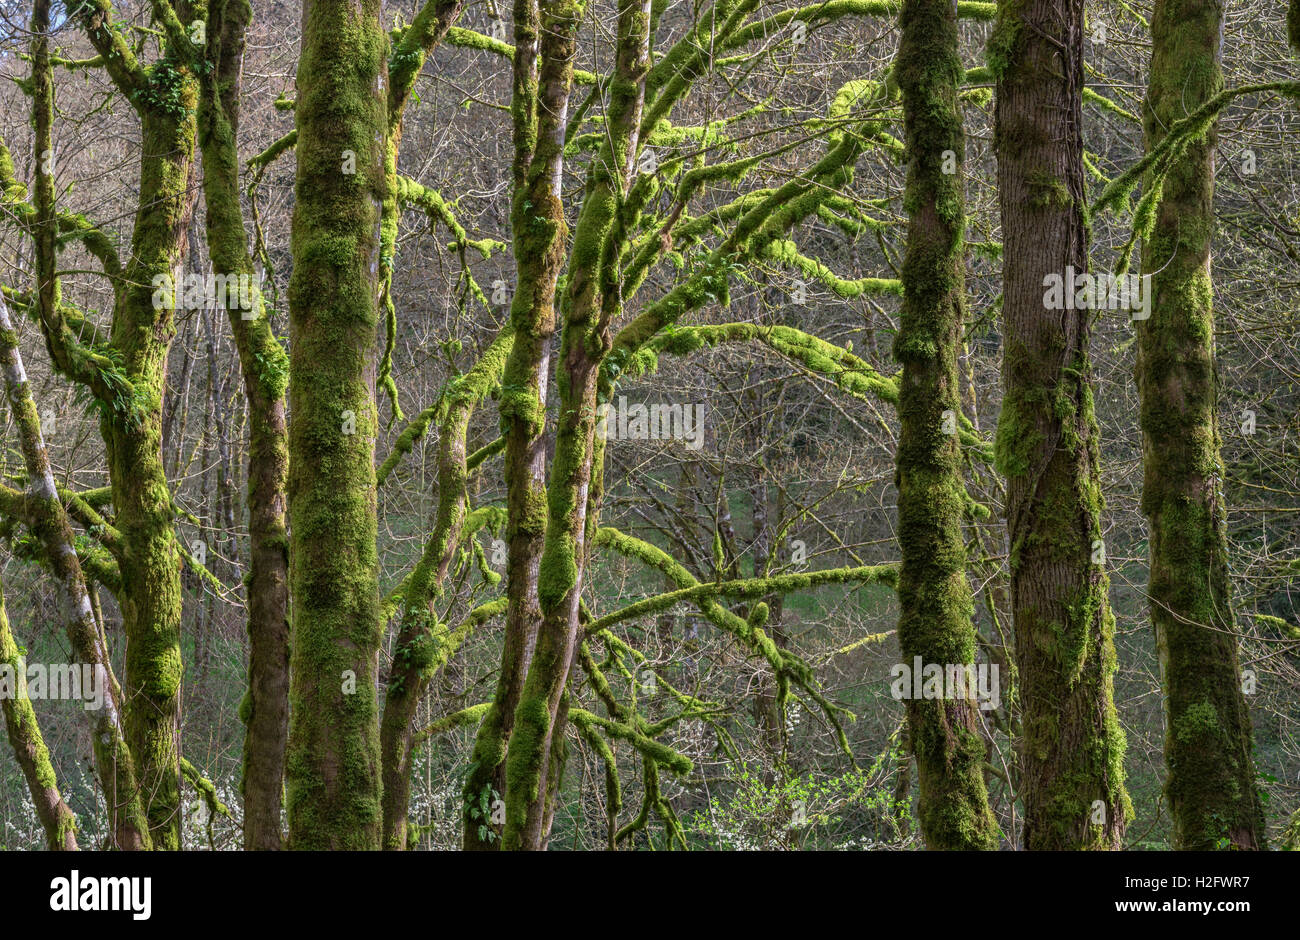 USA, Oregon, Tryon Creek State Natural Area, Lush moss and ferns growing on bigleaf maple and red alder trees in spring. Stock Photo